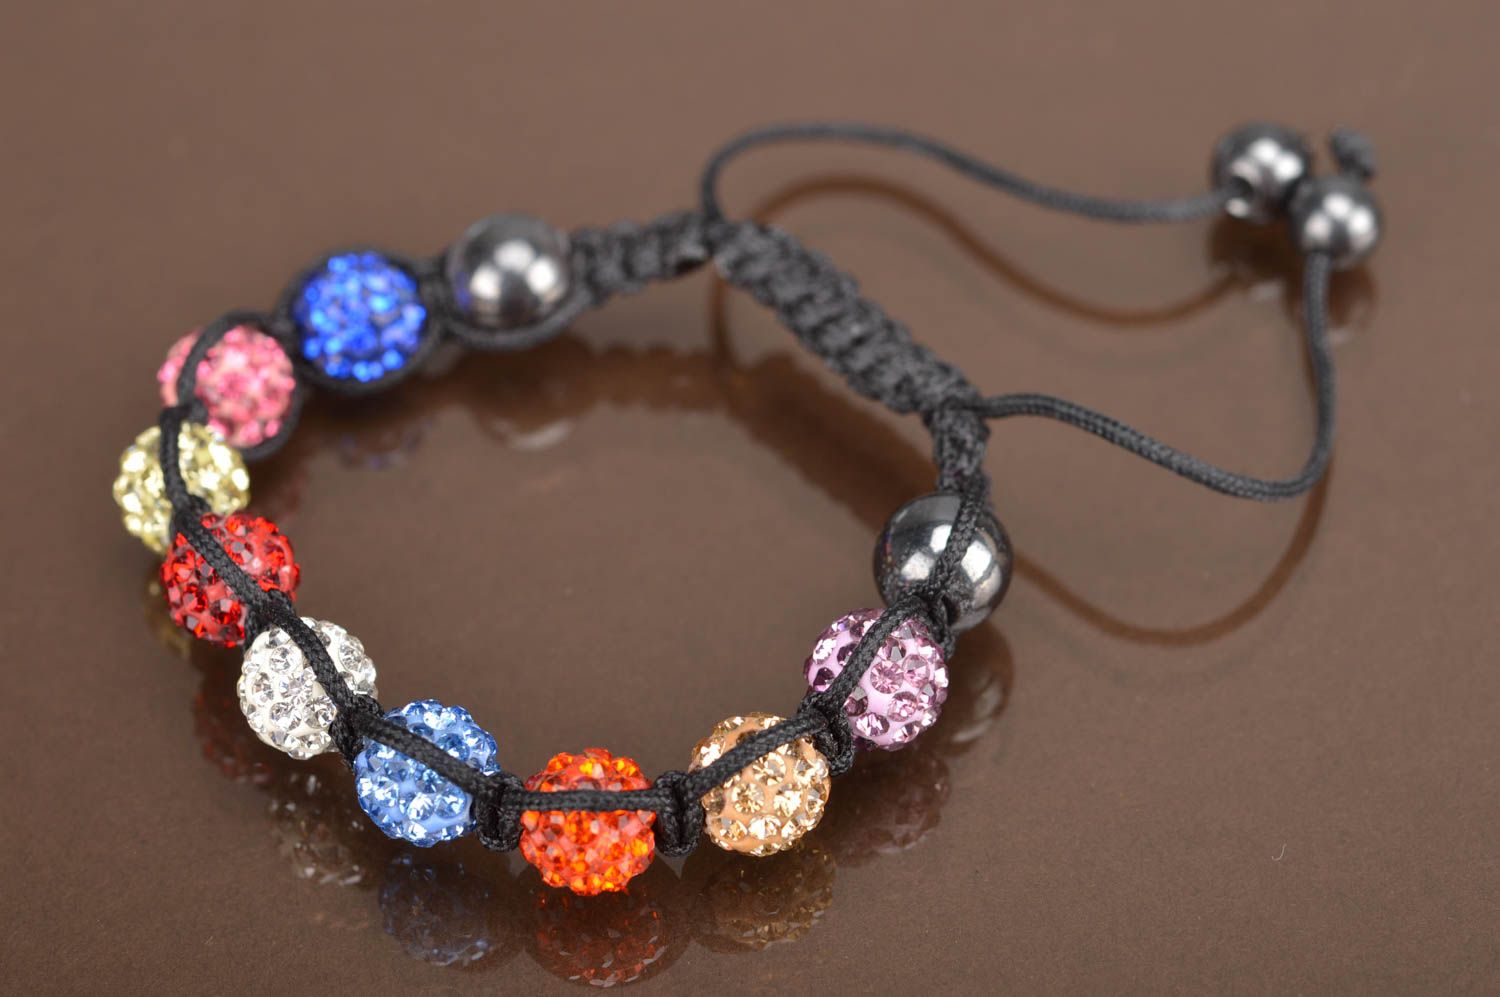 Handmade stylish cute unusual woven colorful bracelet with beads for women photo 2